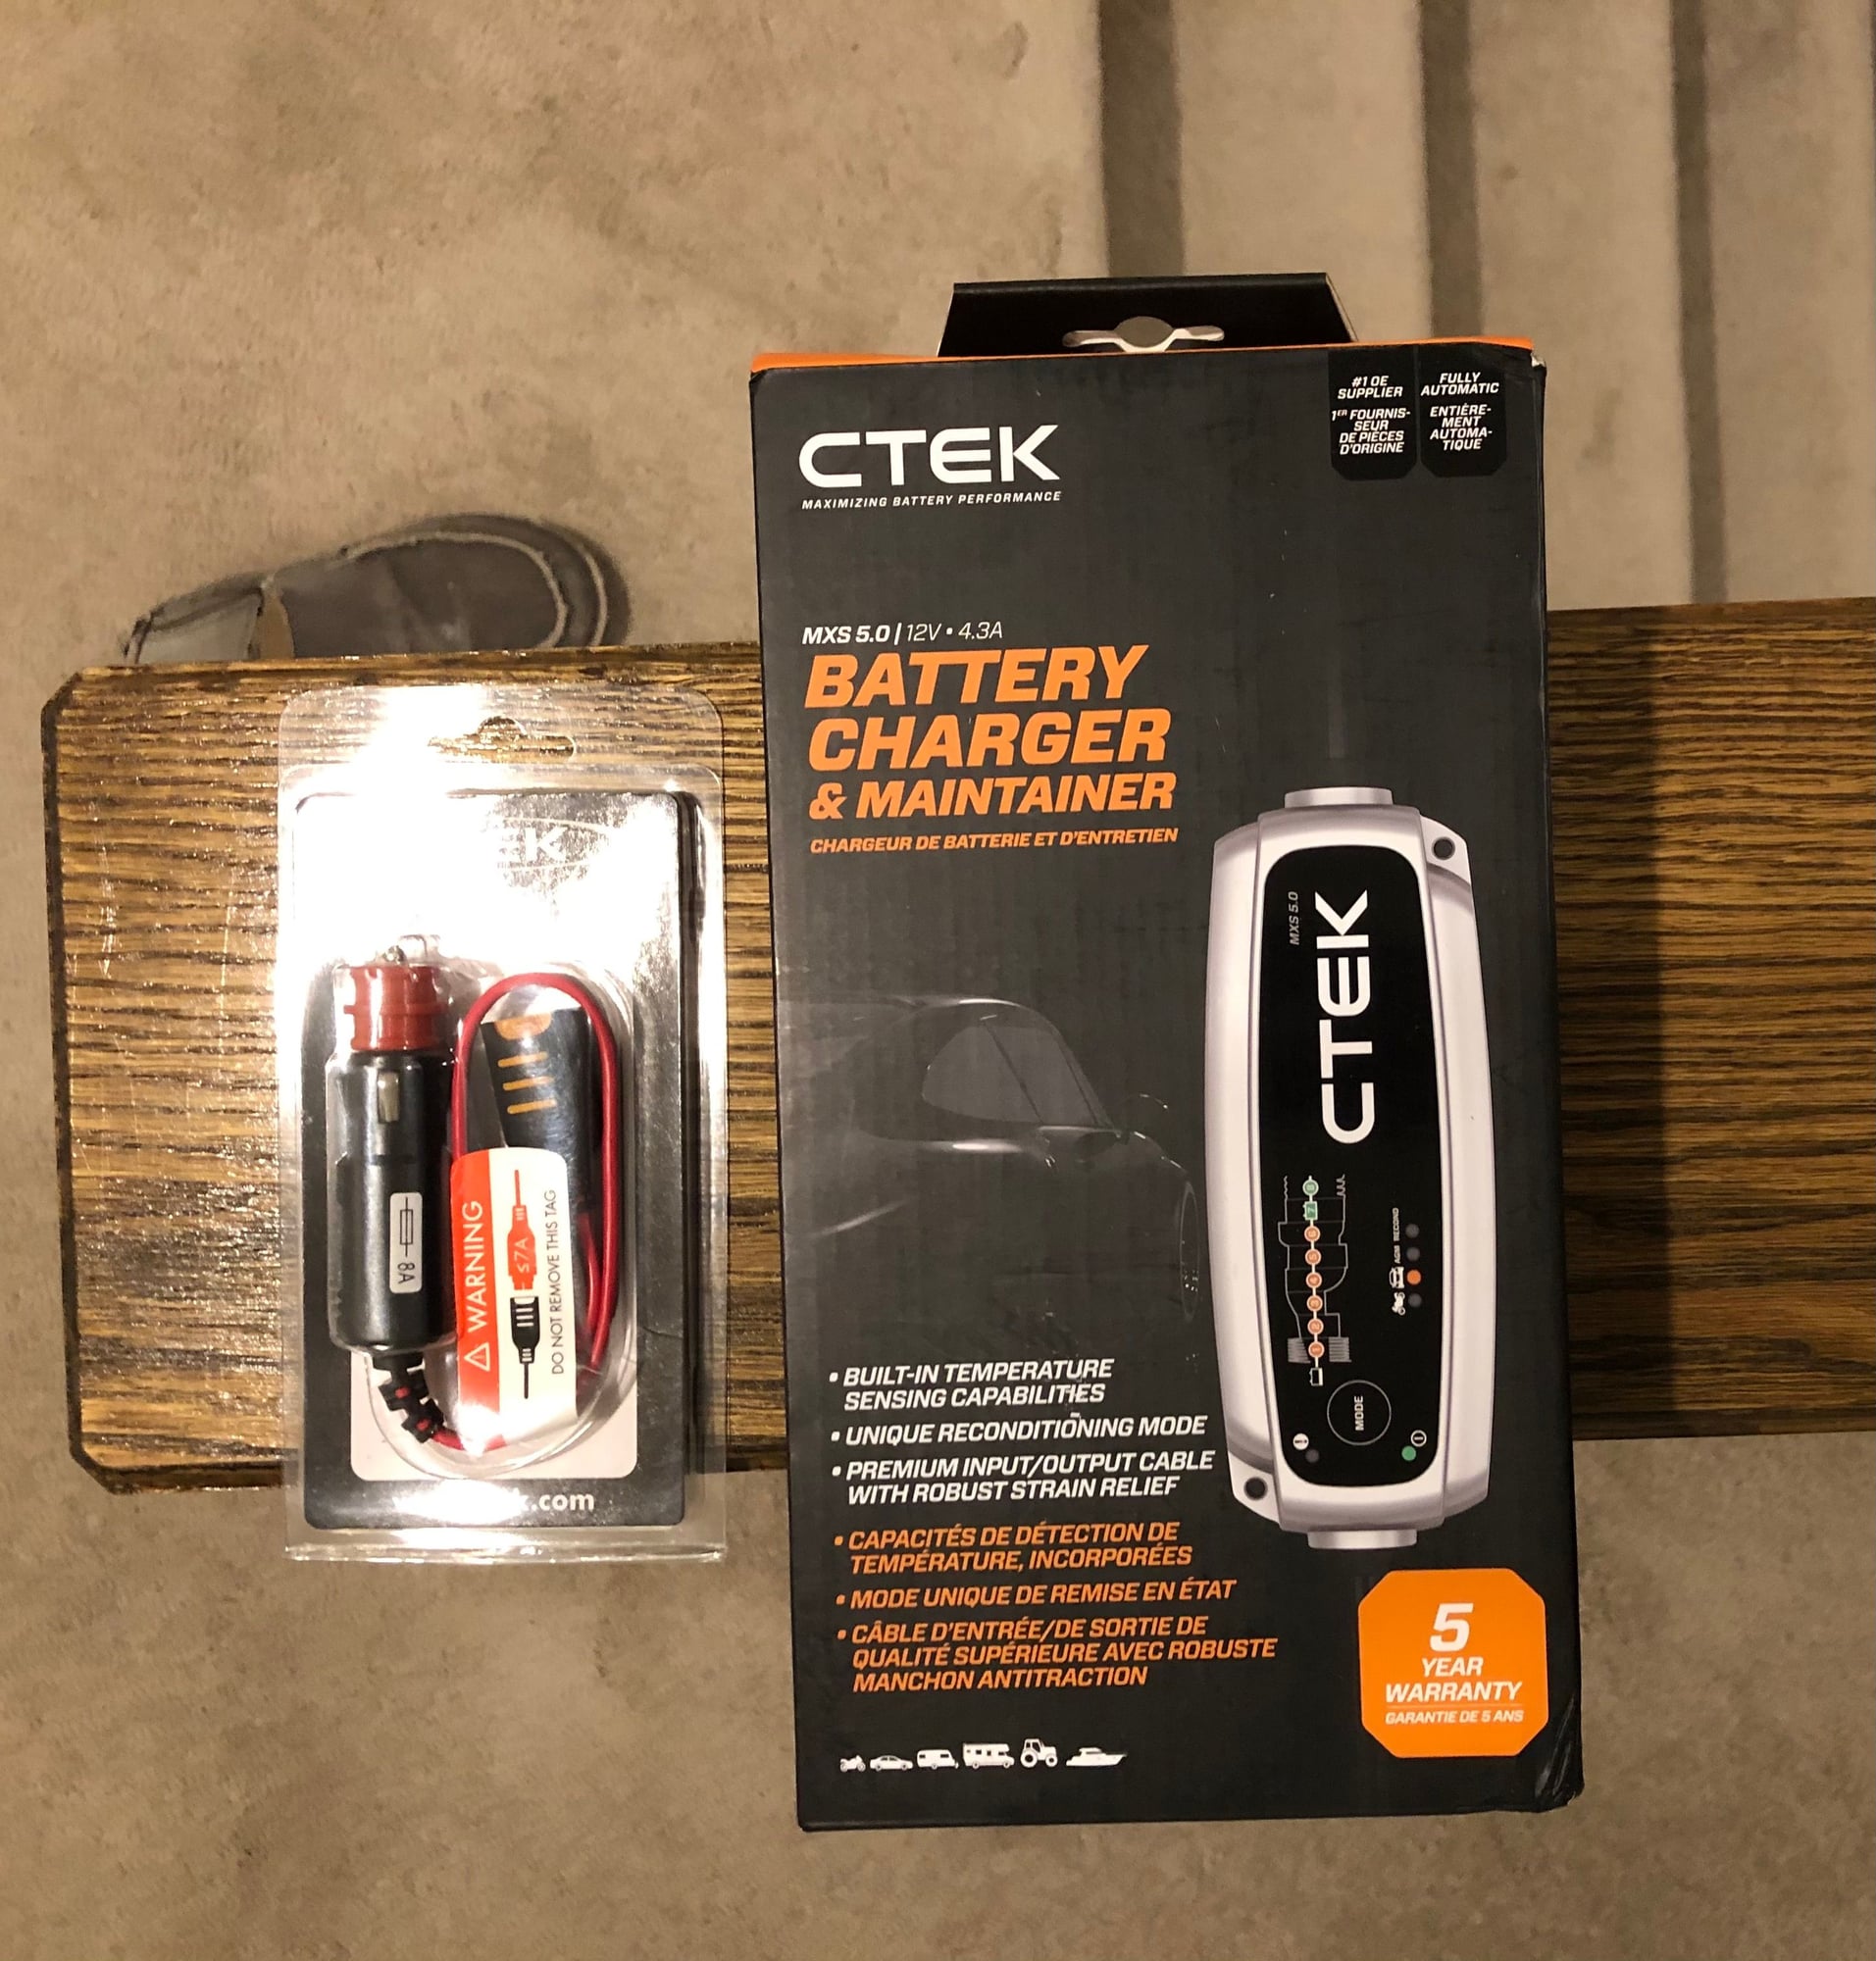 Miscellaneous - CTEK MXS 5.0 Battery charger and maintainer & 12 volt comfort connect - New - 0  All Models - Fuquay Varina, NC 27526, United States